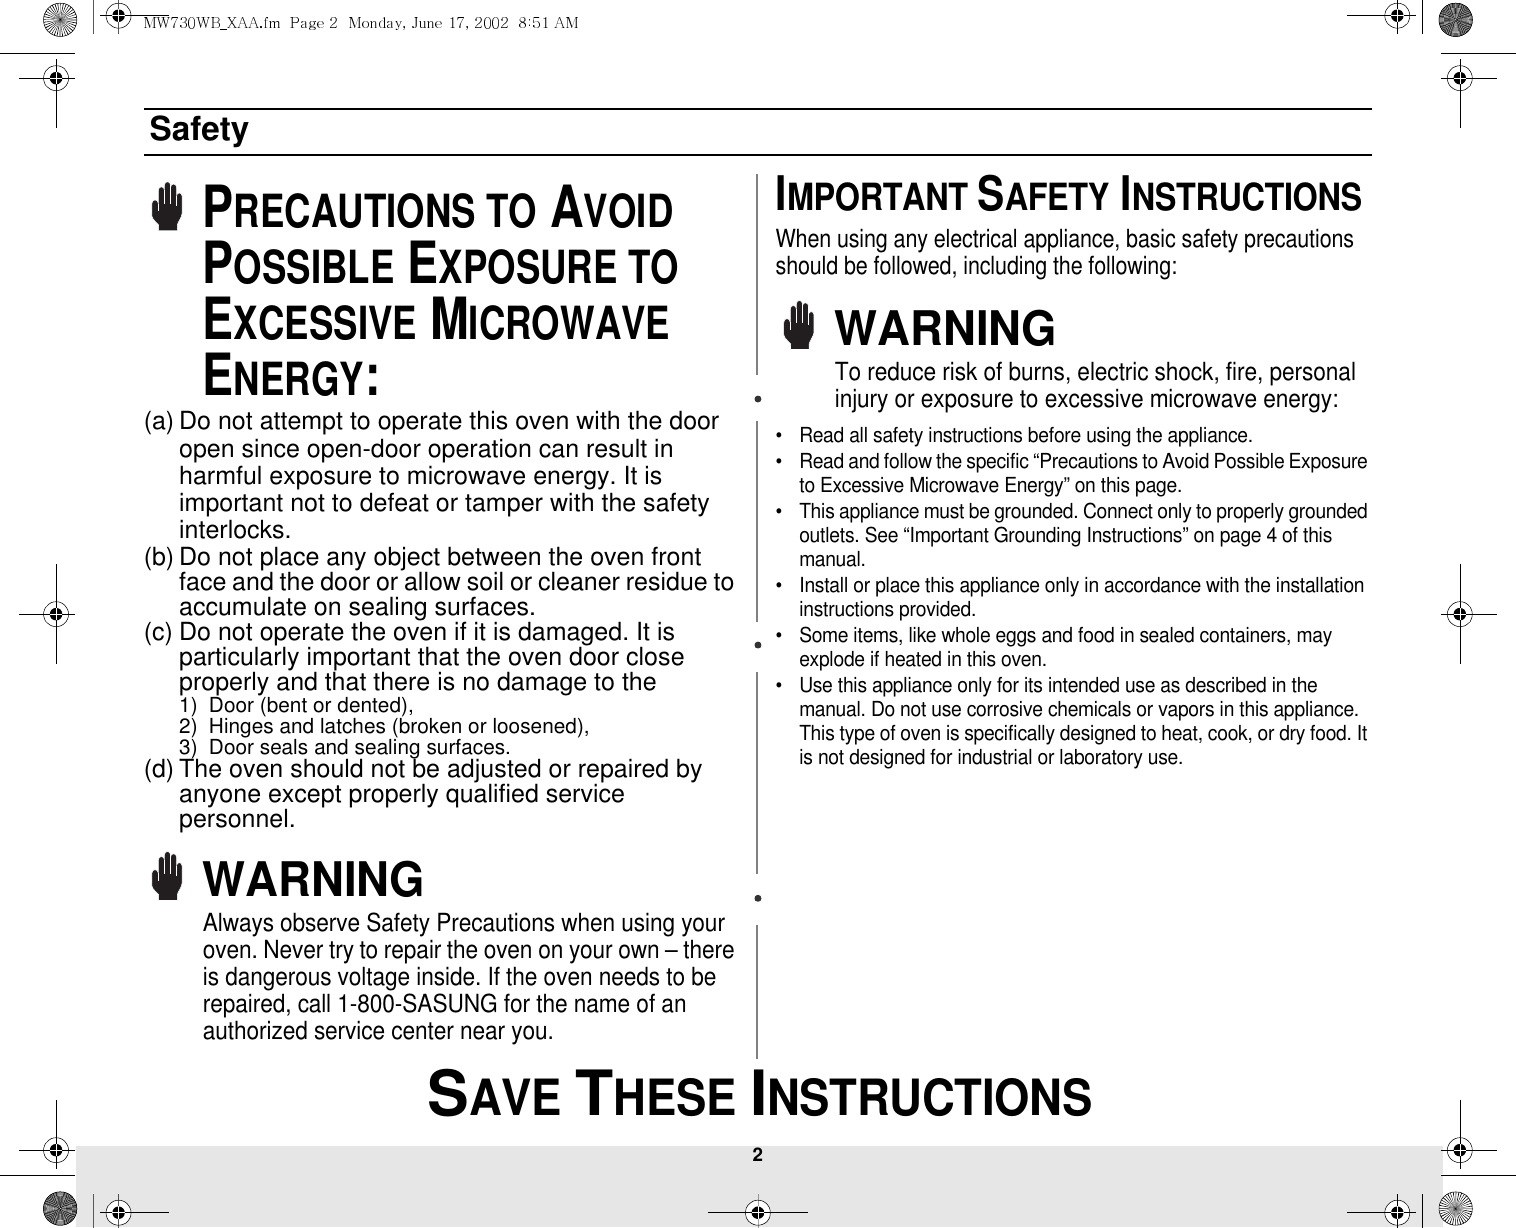 2 SAVE THESE INSTRUCTIONSSafetyPRECAUTIONS TO AVOID POSSIBLE EXPOSURE TO EXCESSIVE MICROWAVE ENERGY:(a) Do not attempt to operate this oven with the door open since open-door operation can result in harmful exposure to microwave energy. It is important not to defeat or tamper with the safety interlocks.(b) Do not place any object between the oven front face and the door or allow soil or cleaner residue to accumulate on sealing surfaces.(c) Do not operate the oven if it is damaged. It is particularly important that the oven door close properly and that there is no damage to the 1) Door (bent or dented), 2) Hinges and latches (broken or loosened), 3) Door seals and sealing surfaces.(d) The oven should not be adjusted or repaired by anyone except properly qualified service personnel.WARNINGAlways observe Safety Precautions when using your oven. Never try to repair the oven on your own – there is dangerous voltage inside. If the oven needs to be repaired, call 1-800-SASUNG for the name of an authorized service center near you. IMPORTANT SAFETY INSTRUCTIONSWhen using any electrical appliance, basic safety precautions should be followed, including the following:WARNINGTo reduce risk of burns, electric shock, fire, personal injury or exposure to excessive microwave energy:• Read all safety instructions before using the appliance.• Read and follow the specific “Precautions to Avoid Possible Exposure to Excessive Microwave Energy” on this page.• This appliance must be grounded. Connect only to properly grounded outlets. See “Important Grounding Instructions” on page 4 of this manual. • Install or place this appliance only in accordance with the installation instructions provided.• Some items, like whole eggs and food in sealed containers, may explode if heated in this oven.• Use this appliance only for its intended use as described in the manual. Do not use corrosive chemicals or vapors in this appliance. This type of oven is specifically designed to heat, cook, or dry food. It is not designed for industrial or laboratory use.